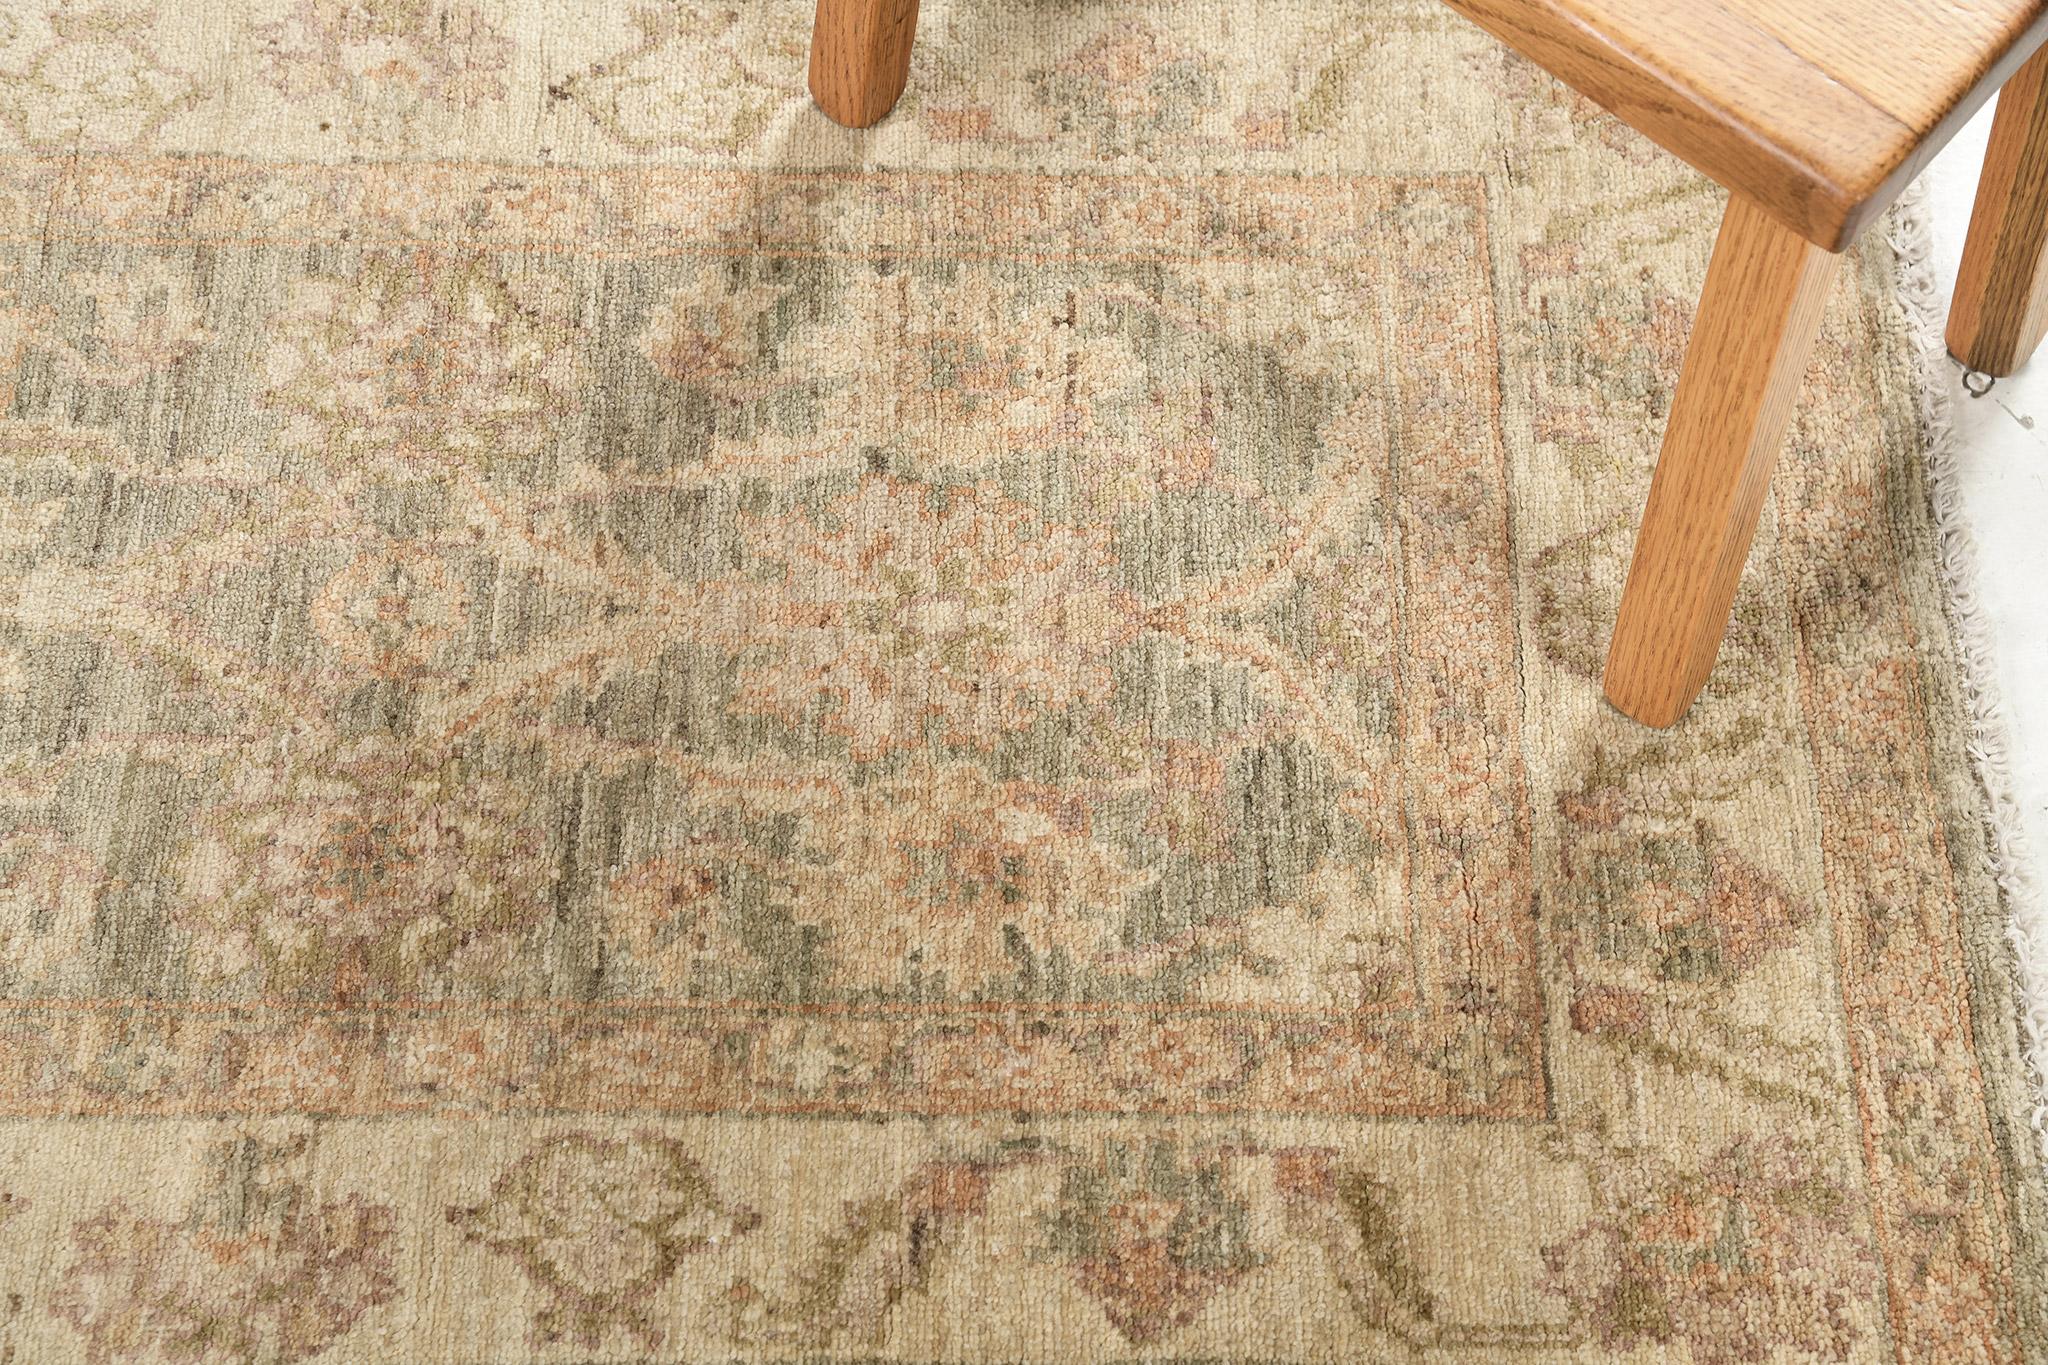 Mehraban Natural Dye Sultanabad Revival Rug In New Condition For Sale In WEST HOLLYWOOD, CA